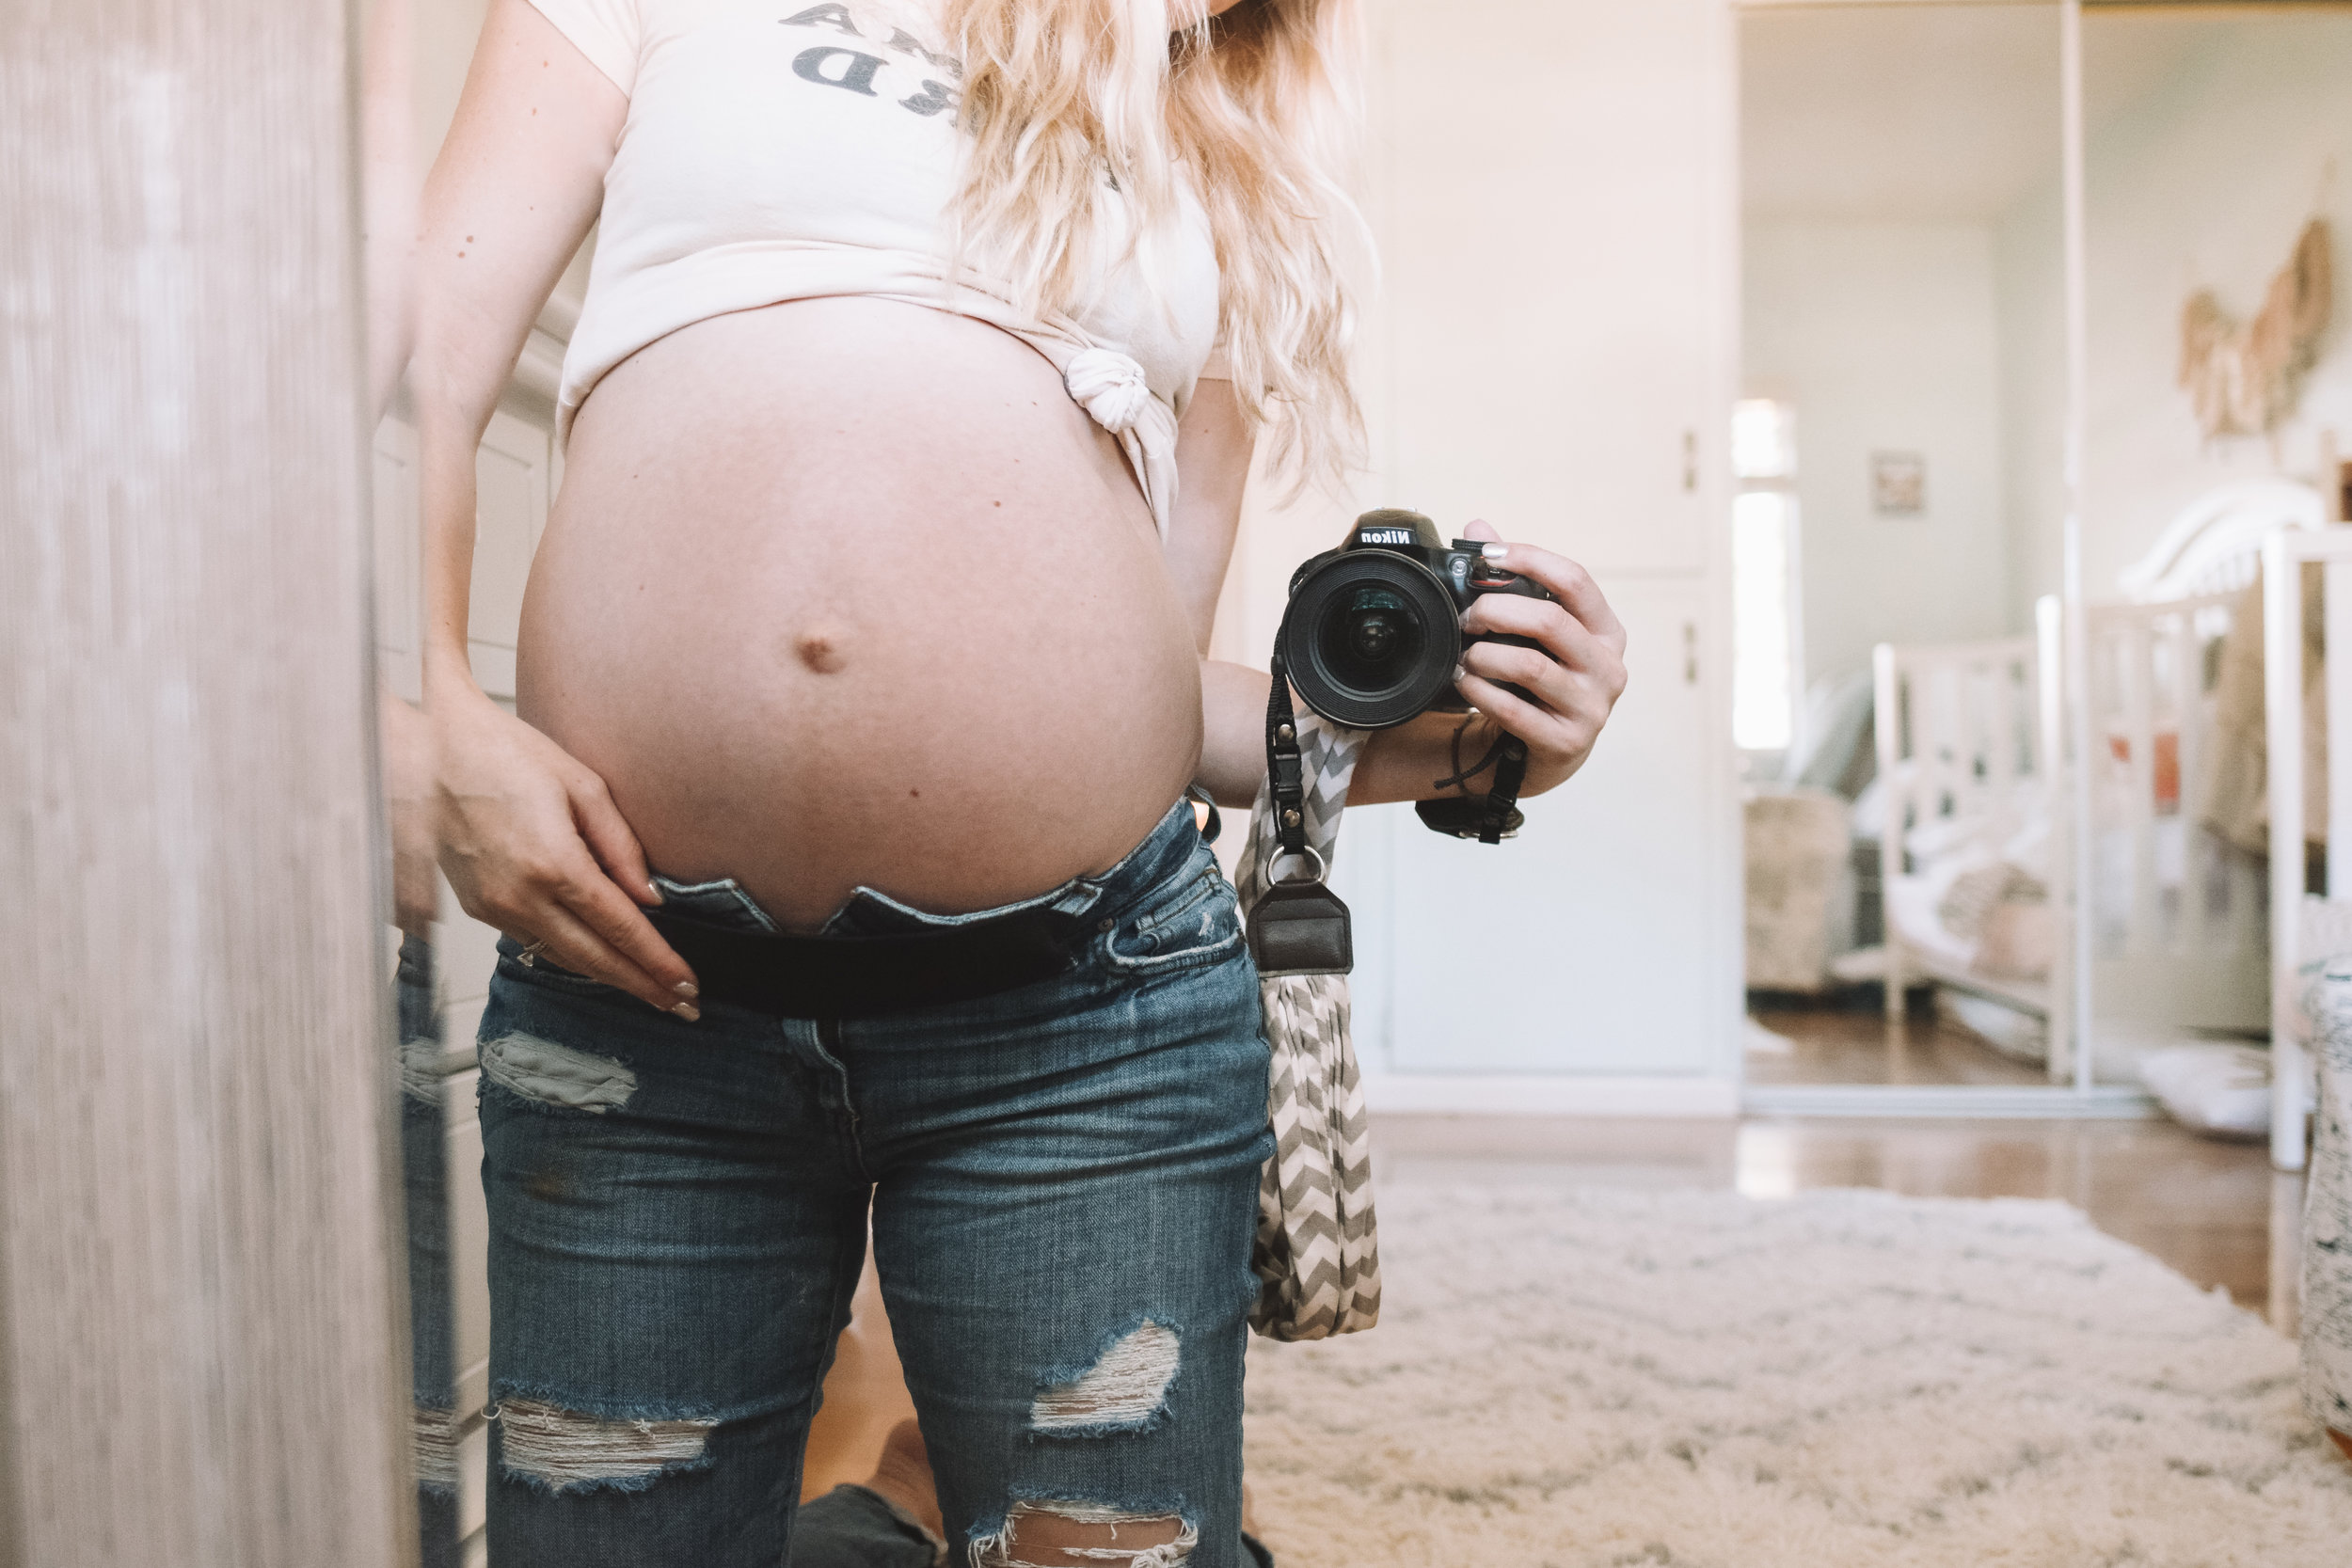 Turn your jeans into cute maternity jeans. — The Overwhelmed Mommy Blog